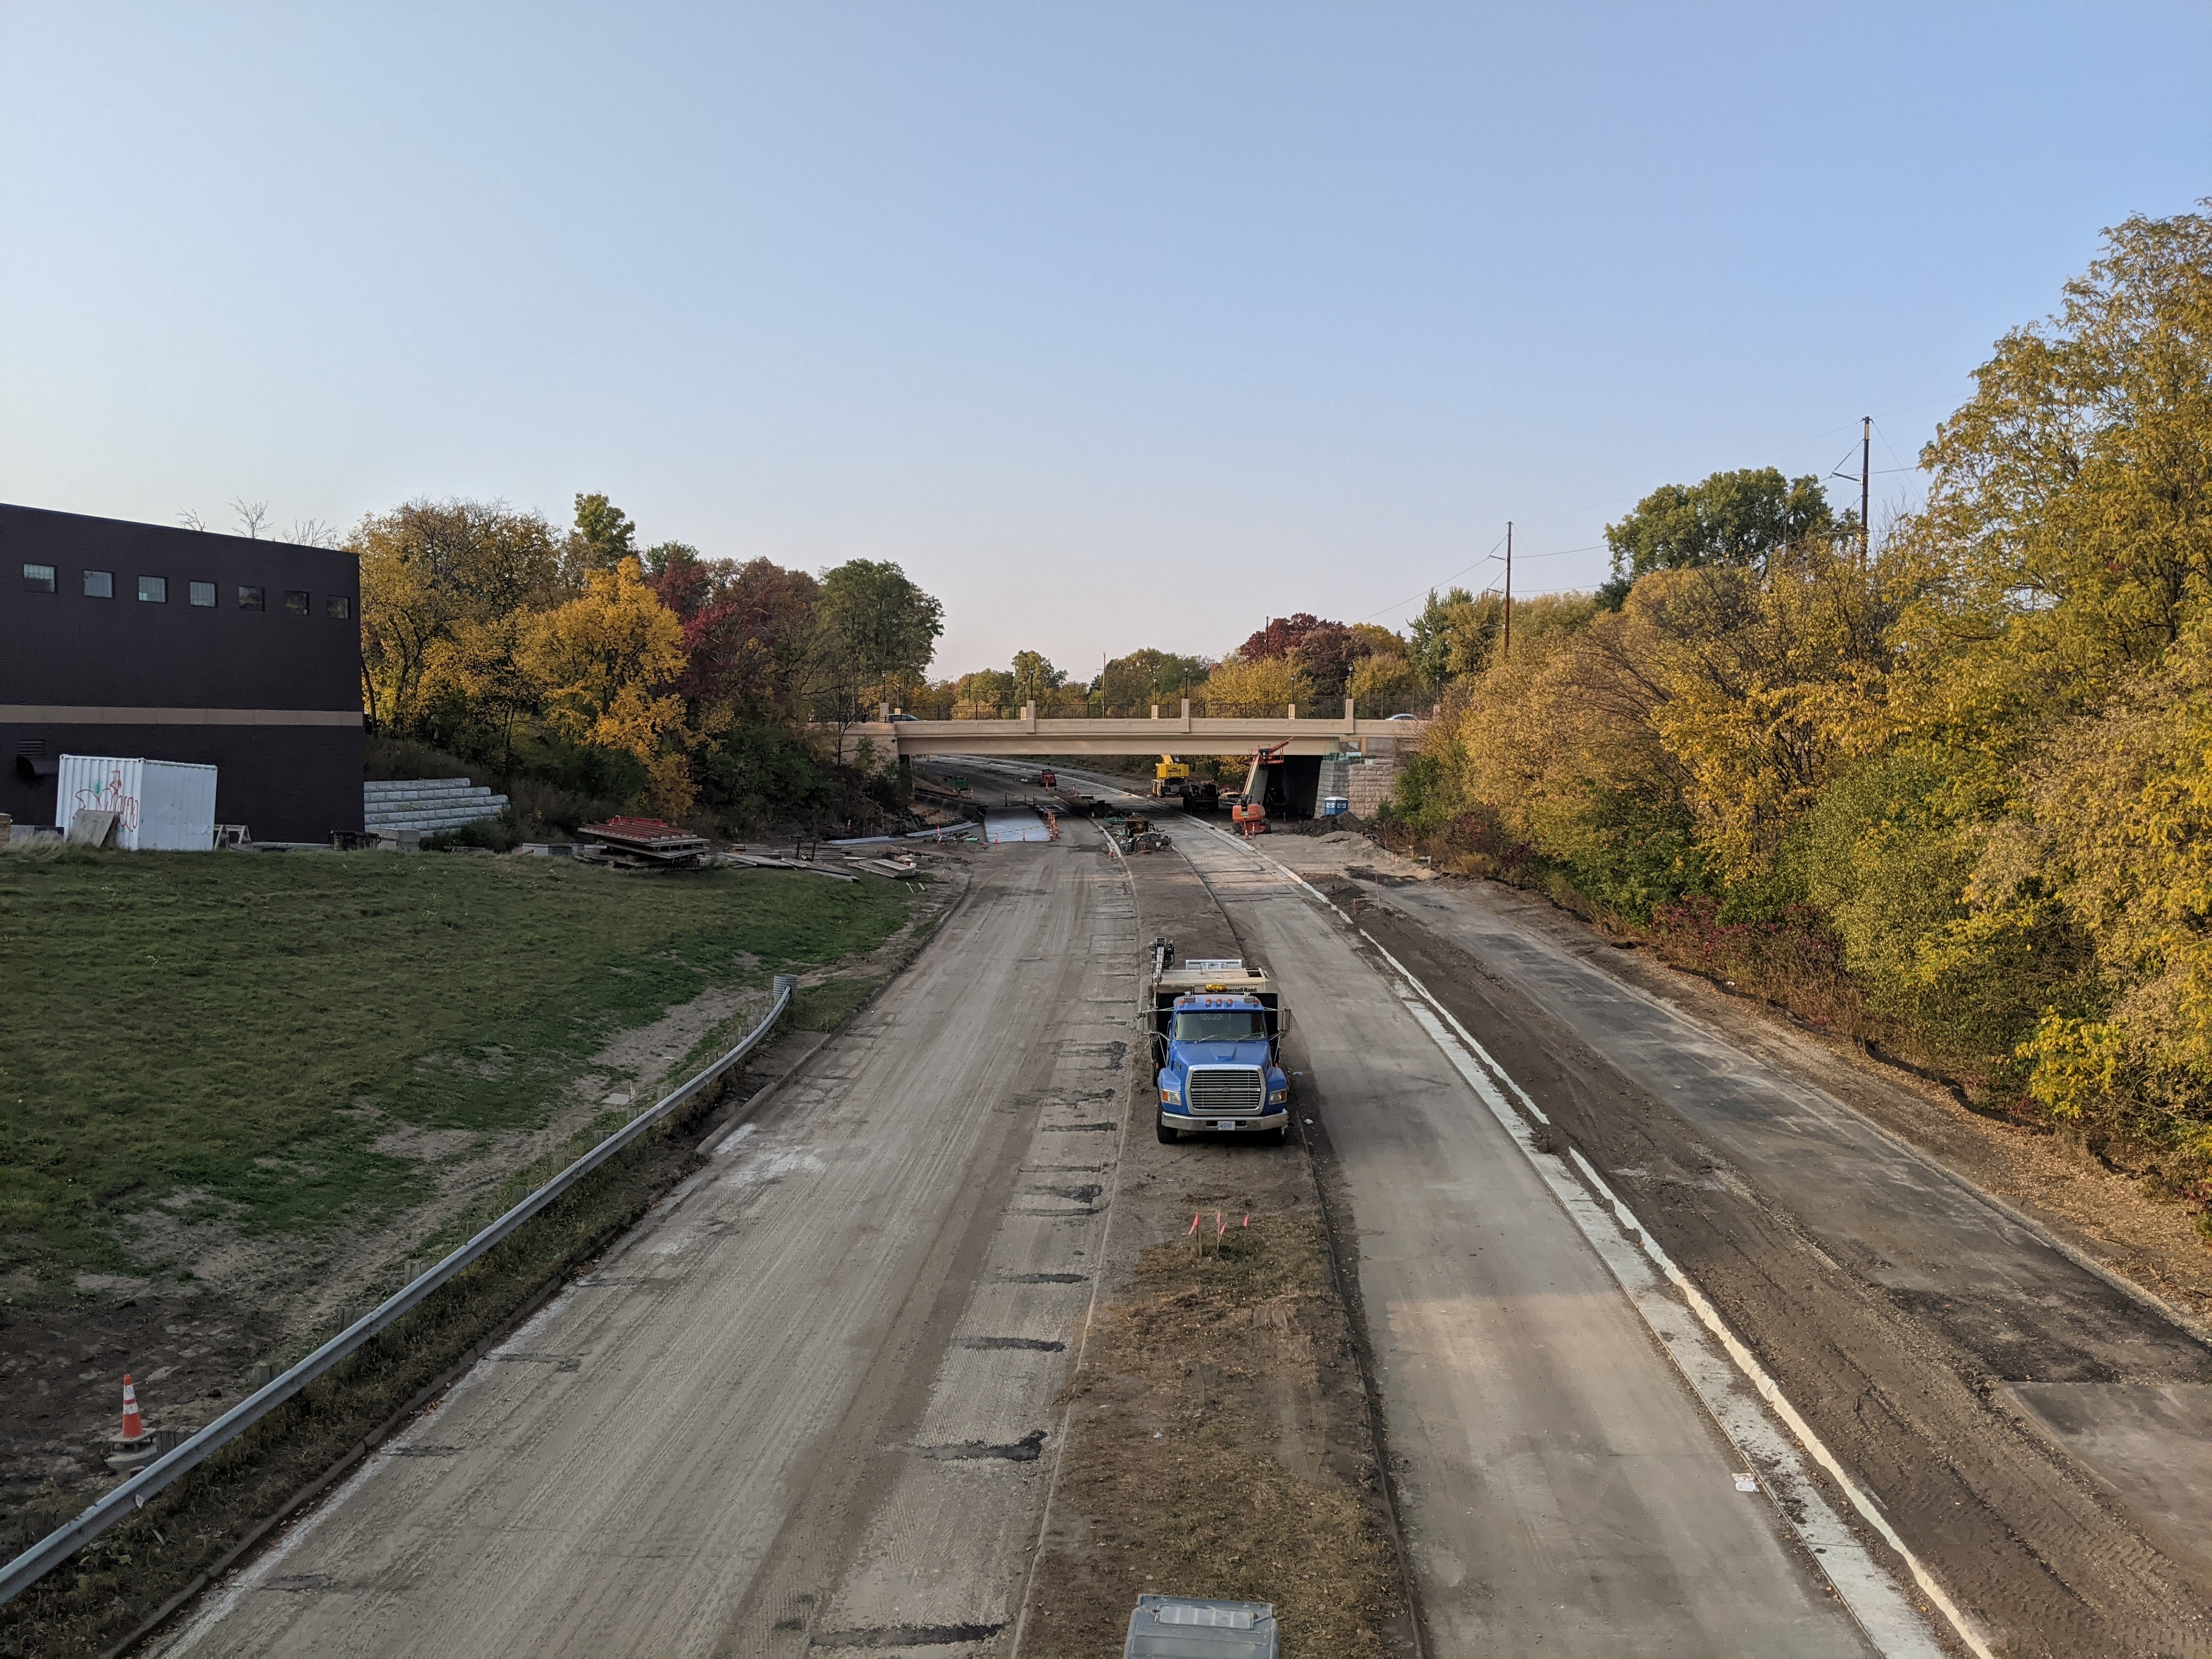 Photo of Ayd Mill Road Construction as of 10.10.20. The view is of Ayd Mill Road north bound from Grand Avenue.